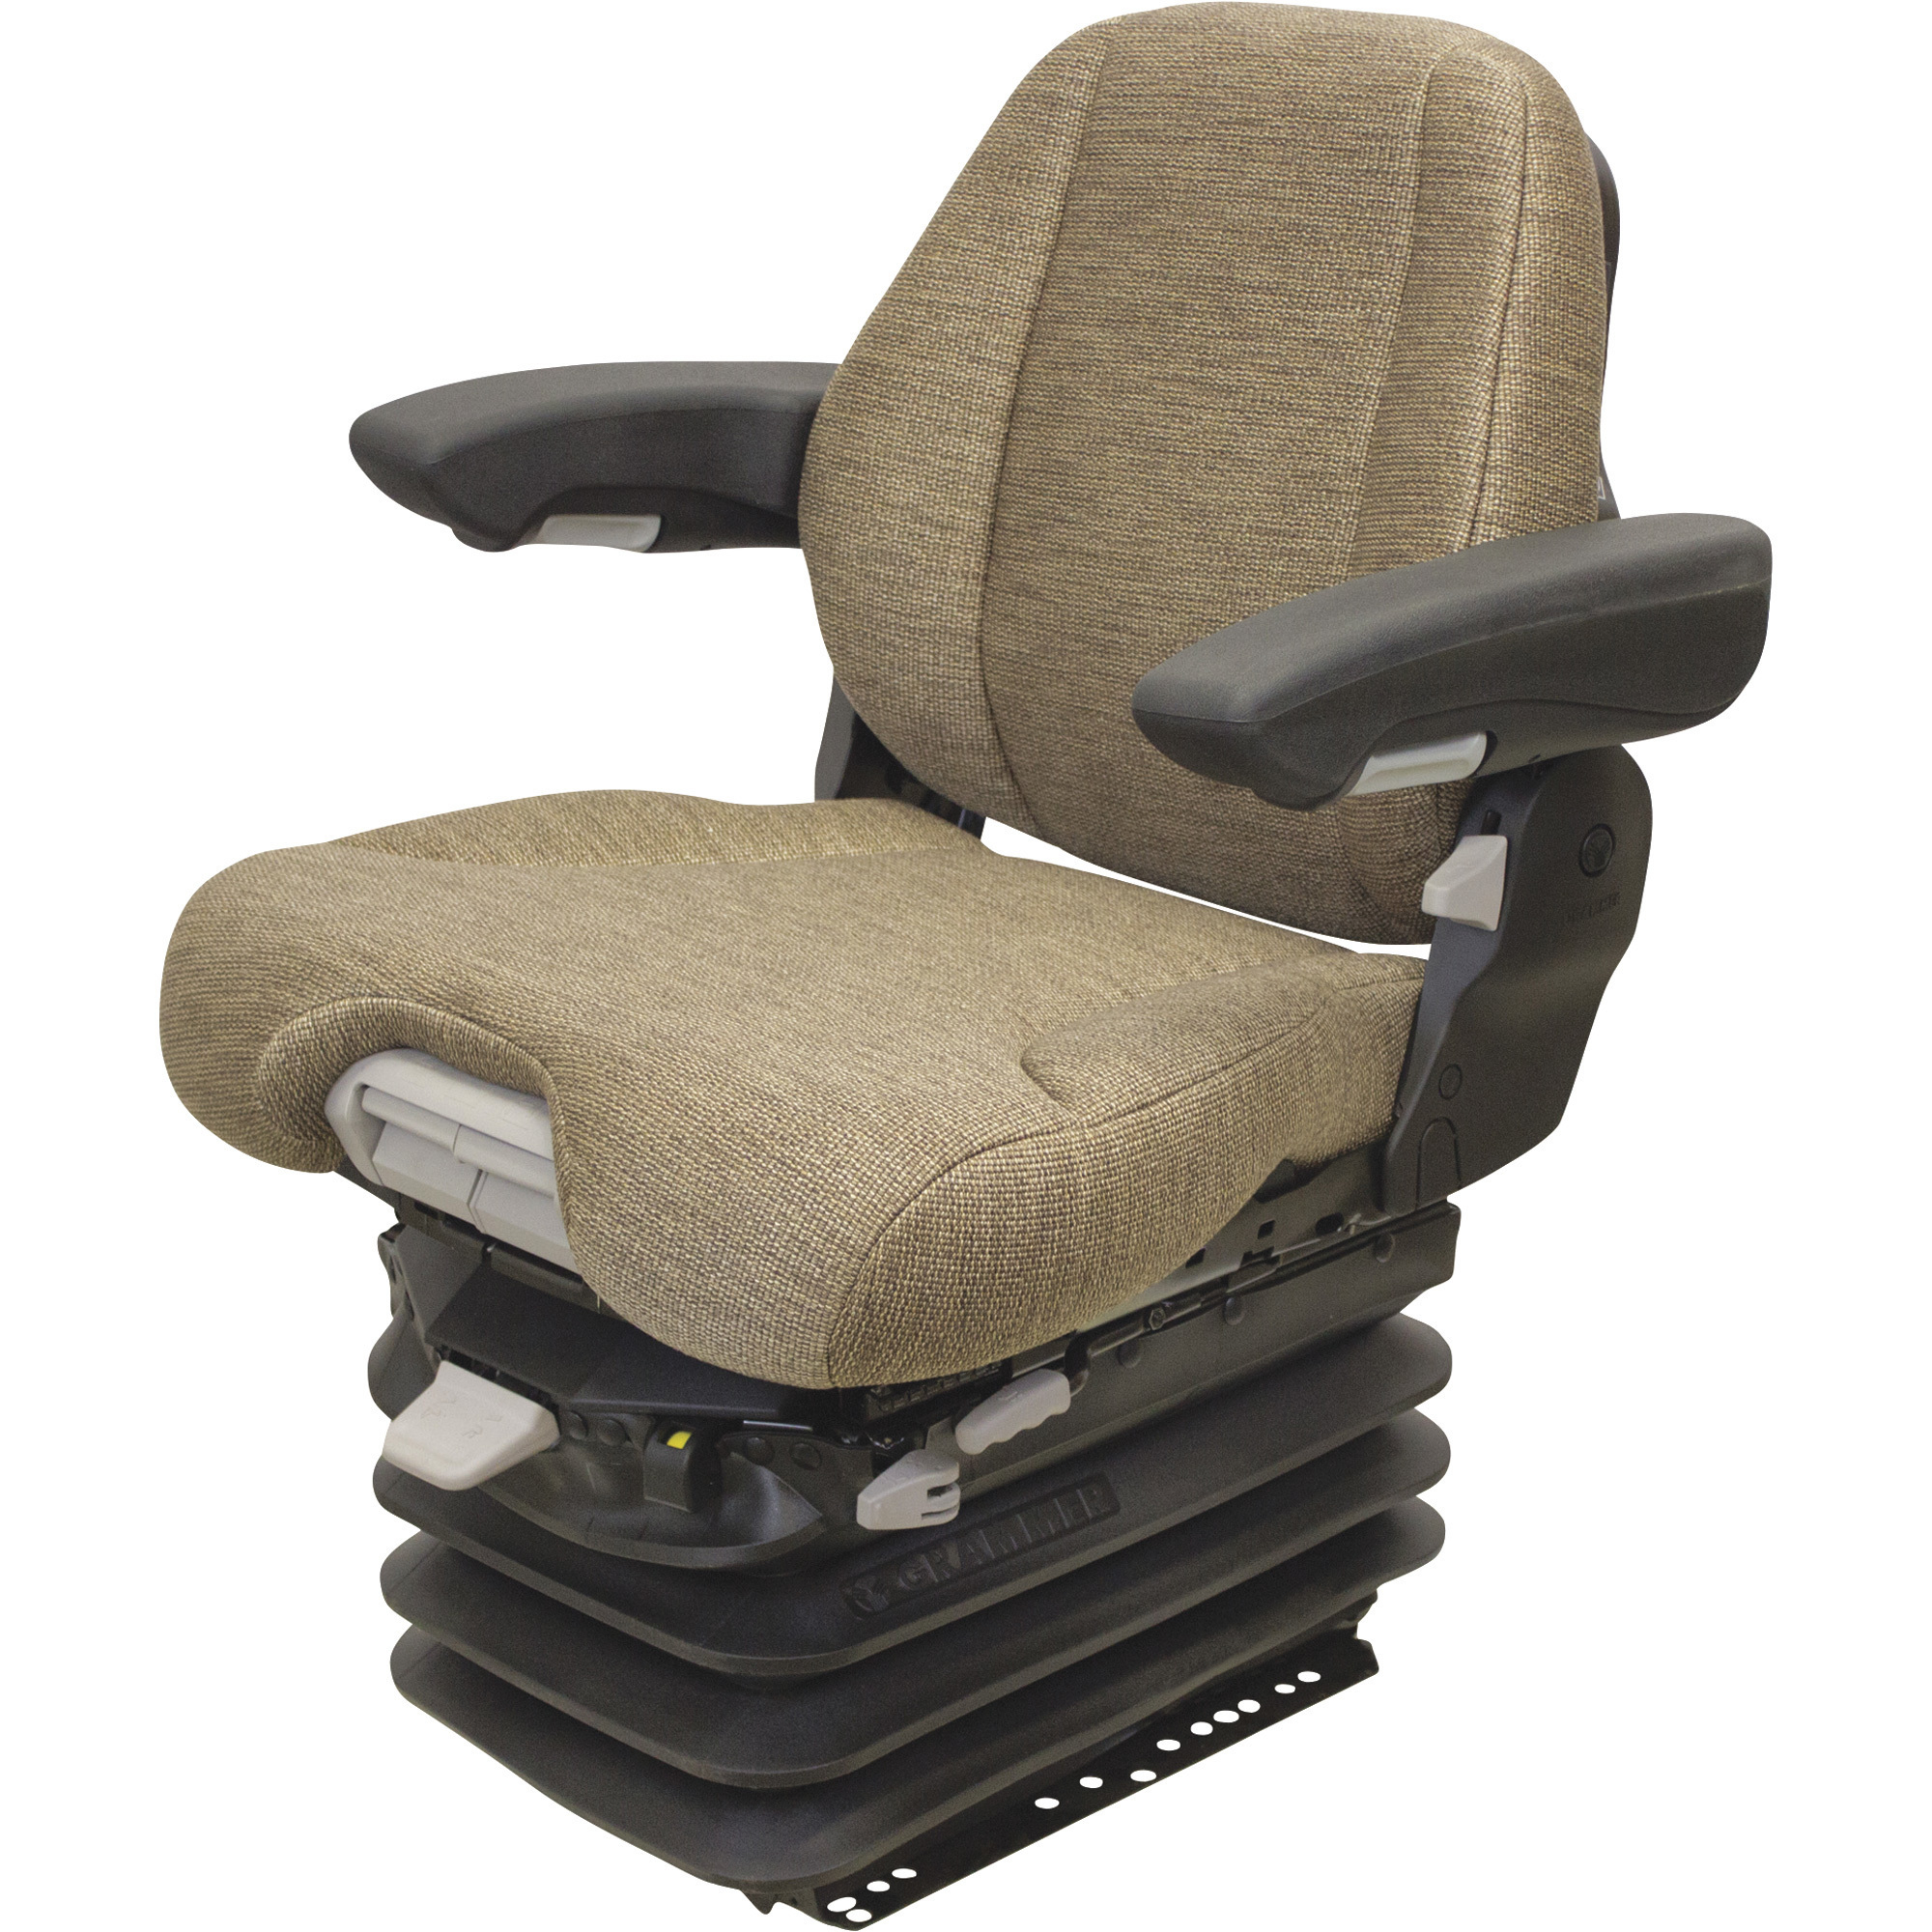 K&M Grammer MSG95/741 Tractor Seat with 12V Air Suspension, Brown, Model 8436